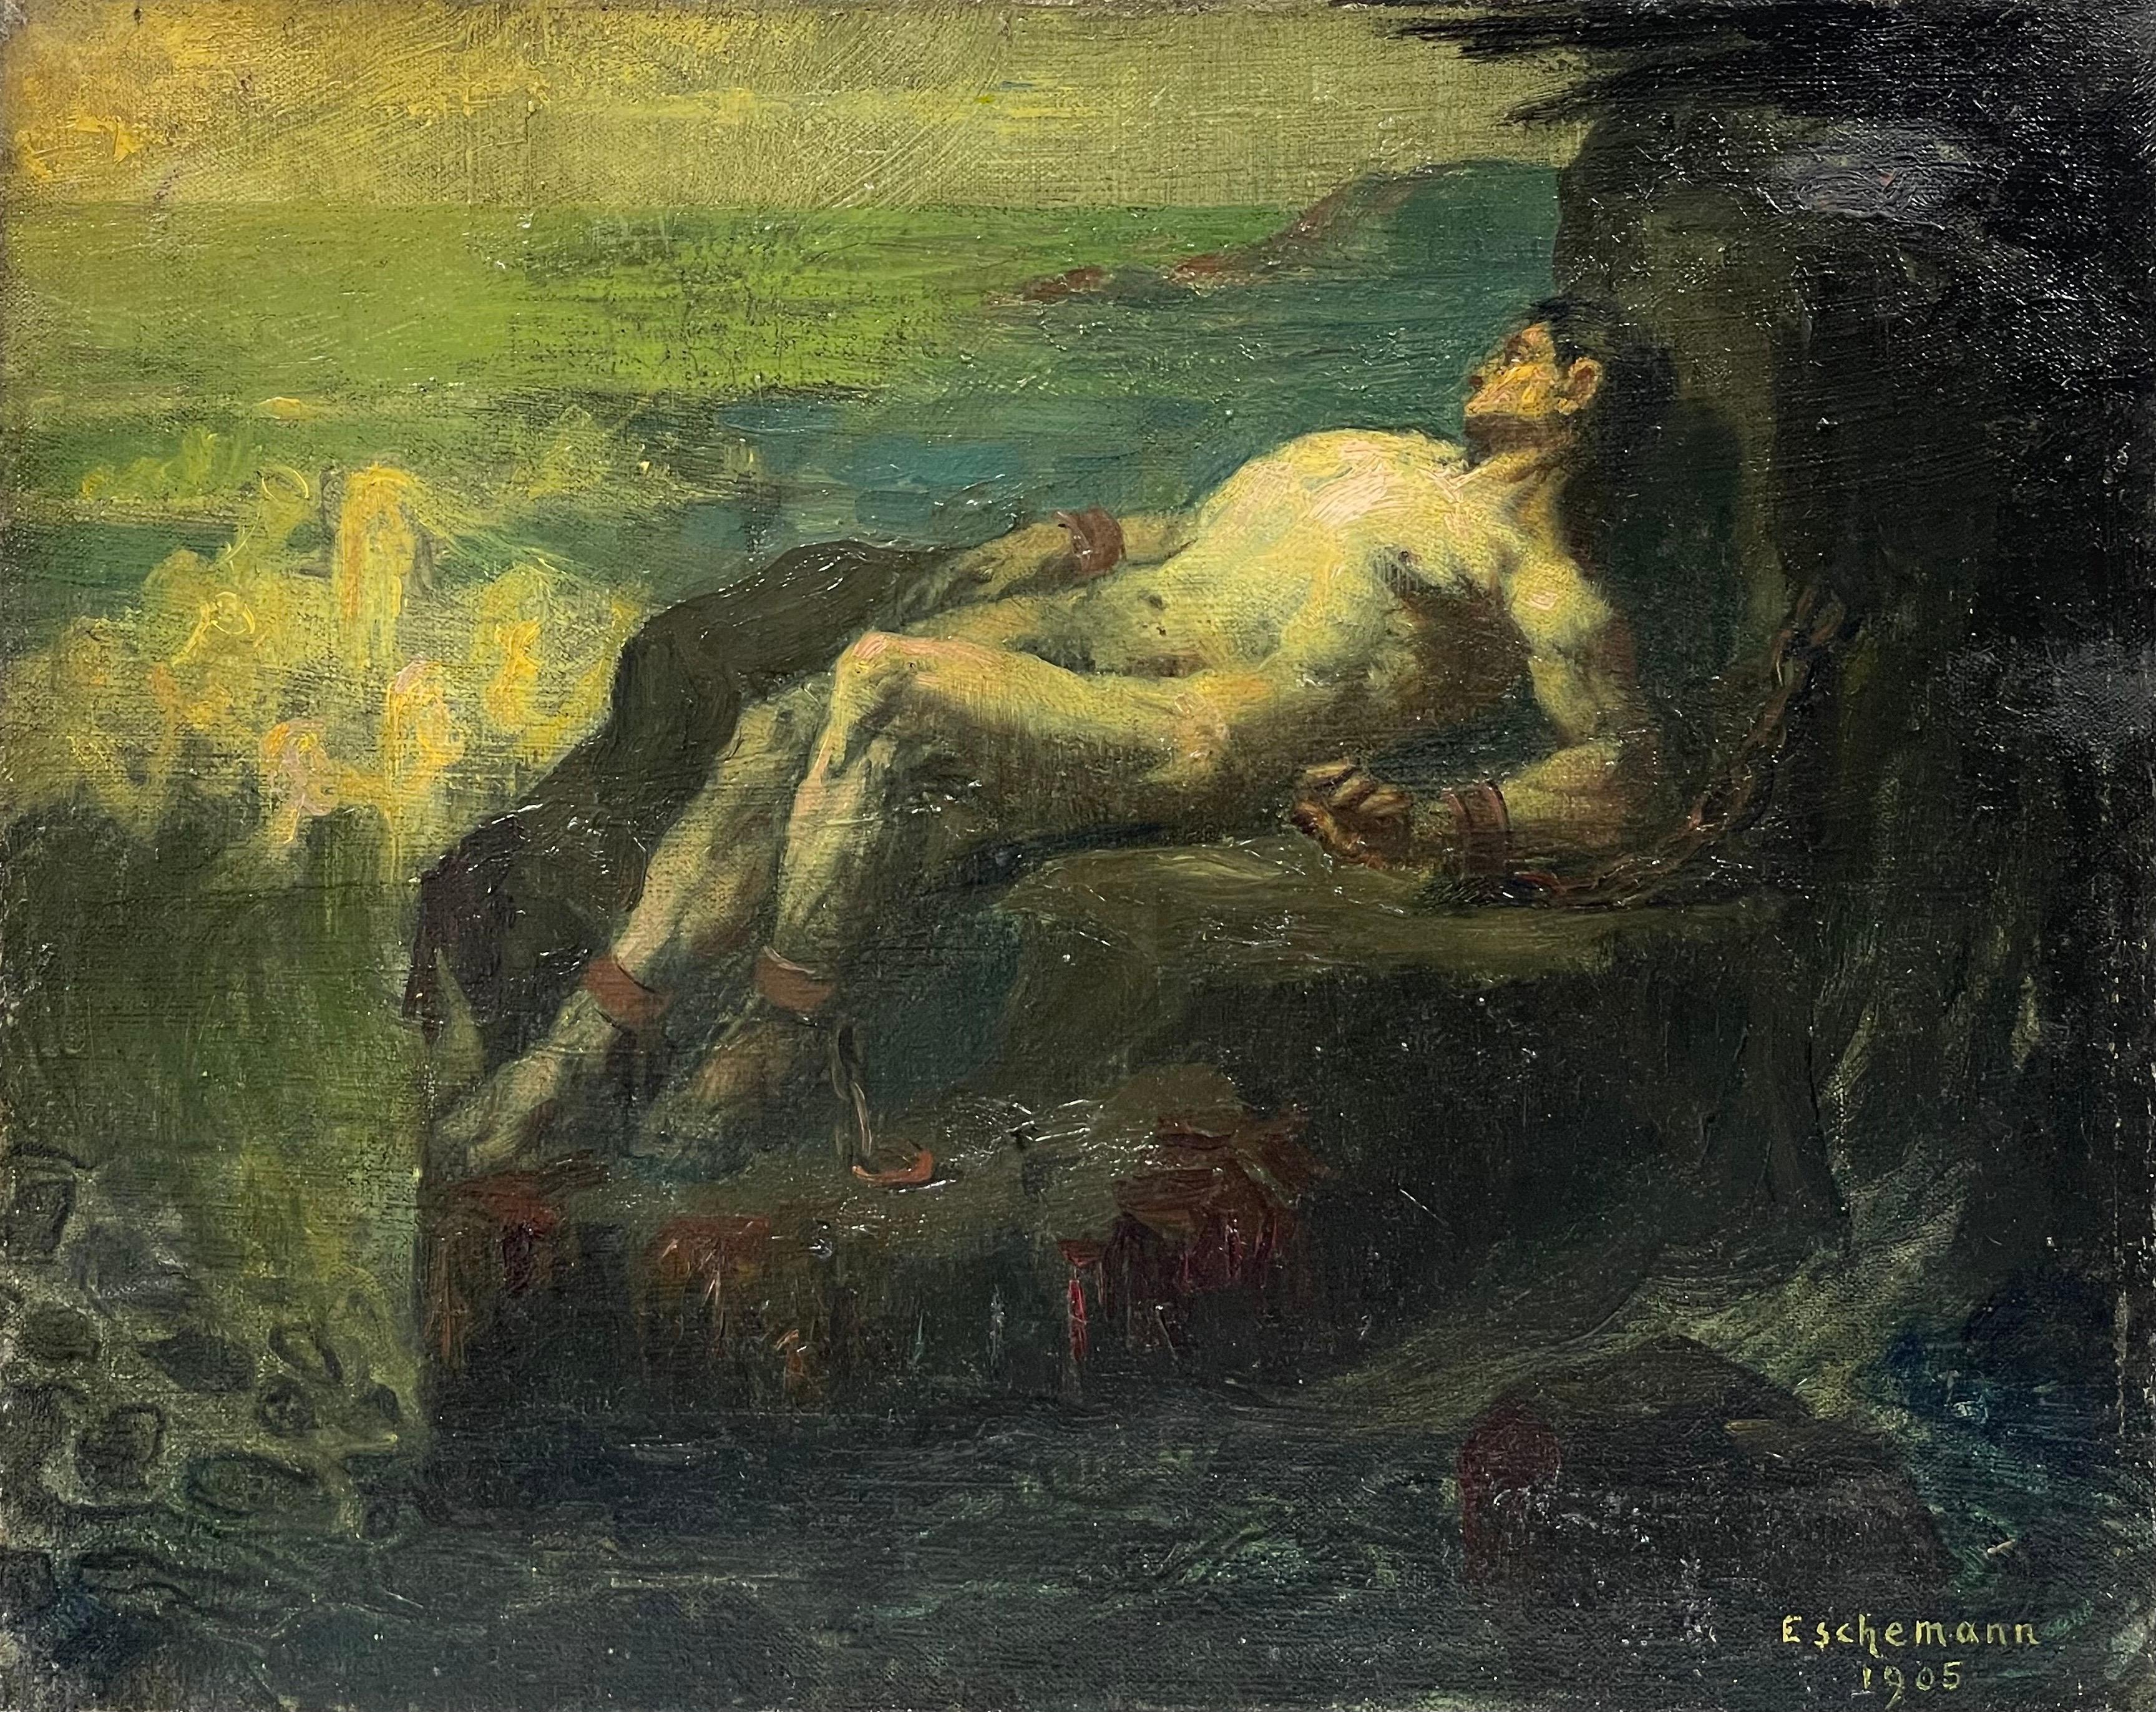 E. Schemann Landscape Painting - Antique French Symbolist Signed Oil Prometheus Chained to Rocks Naked Man by sea